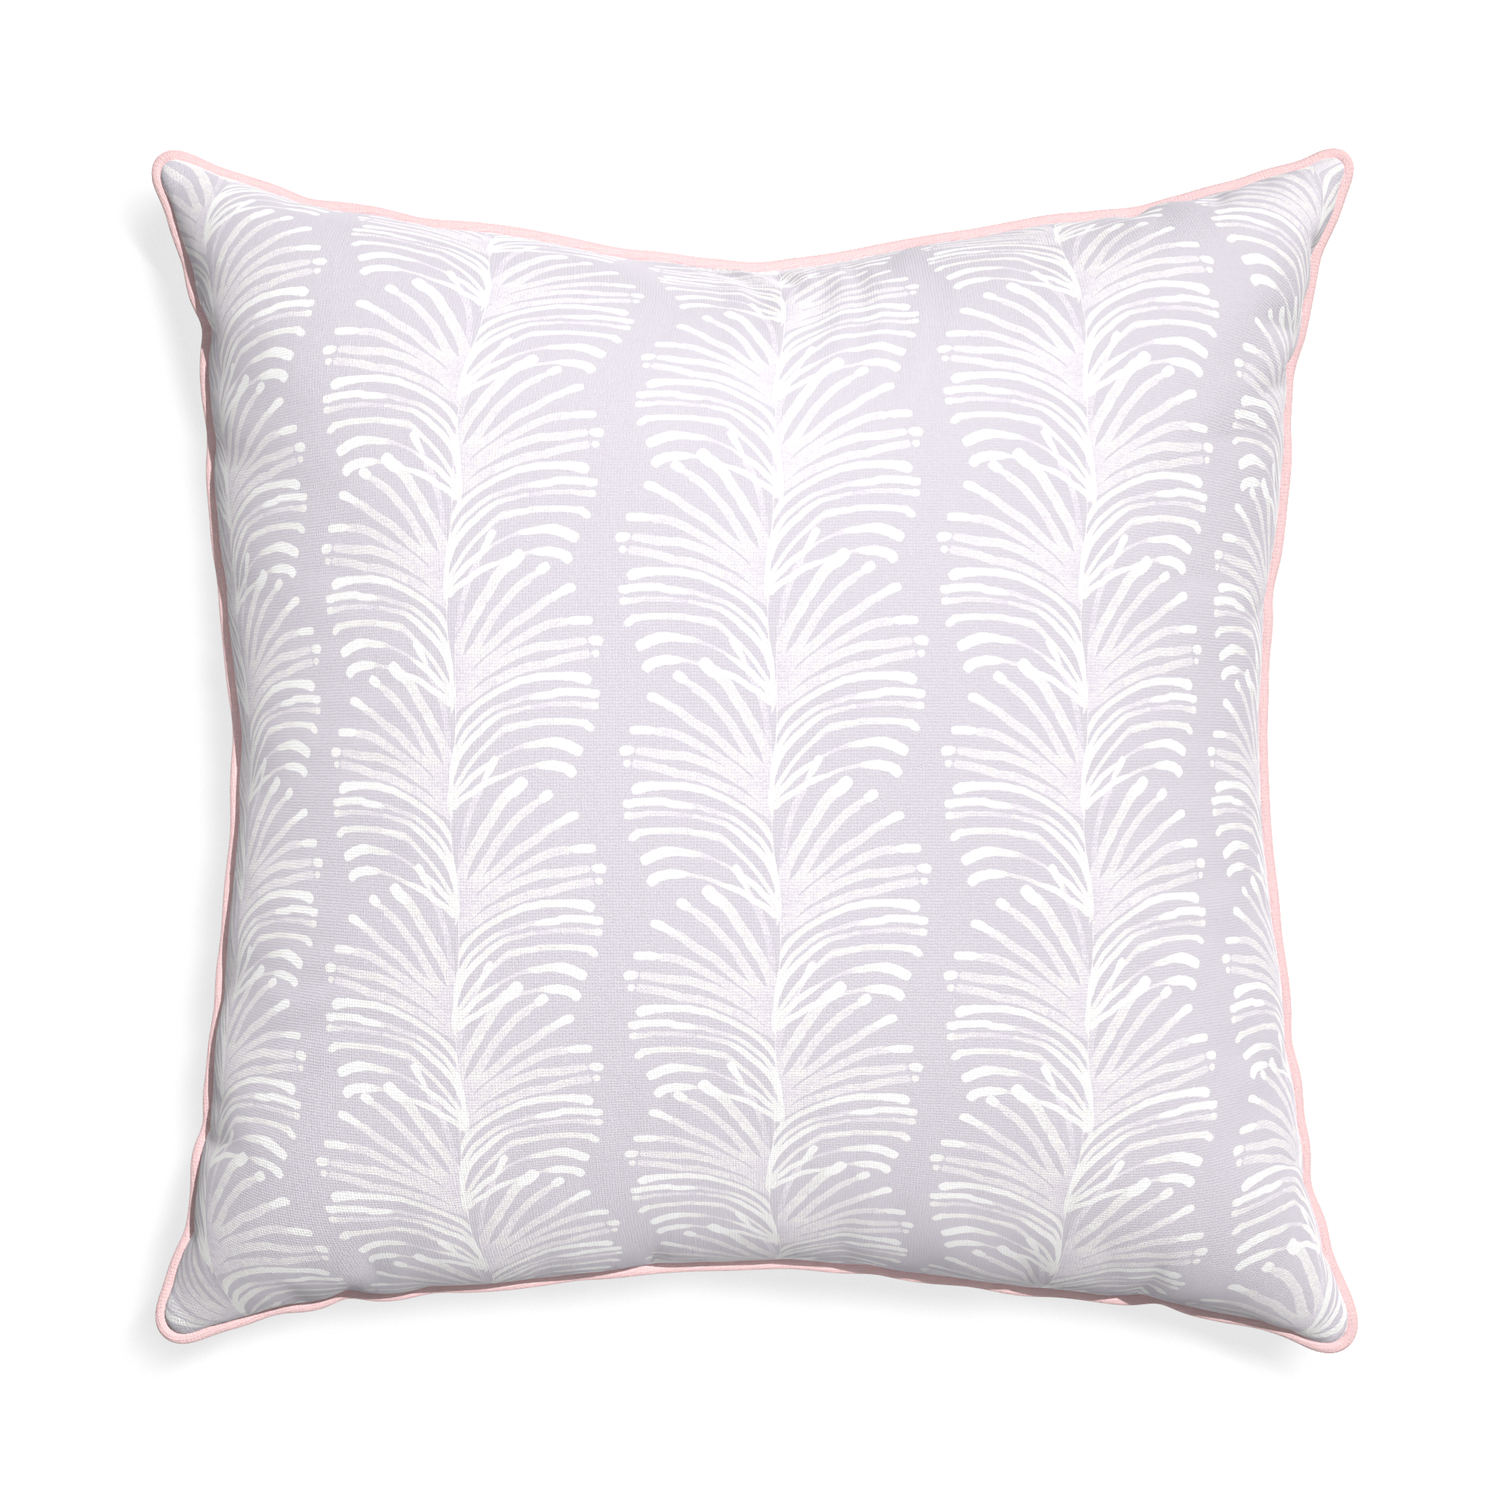 Euro-sham emma lavender custom pillow with petal piping on white background